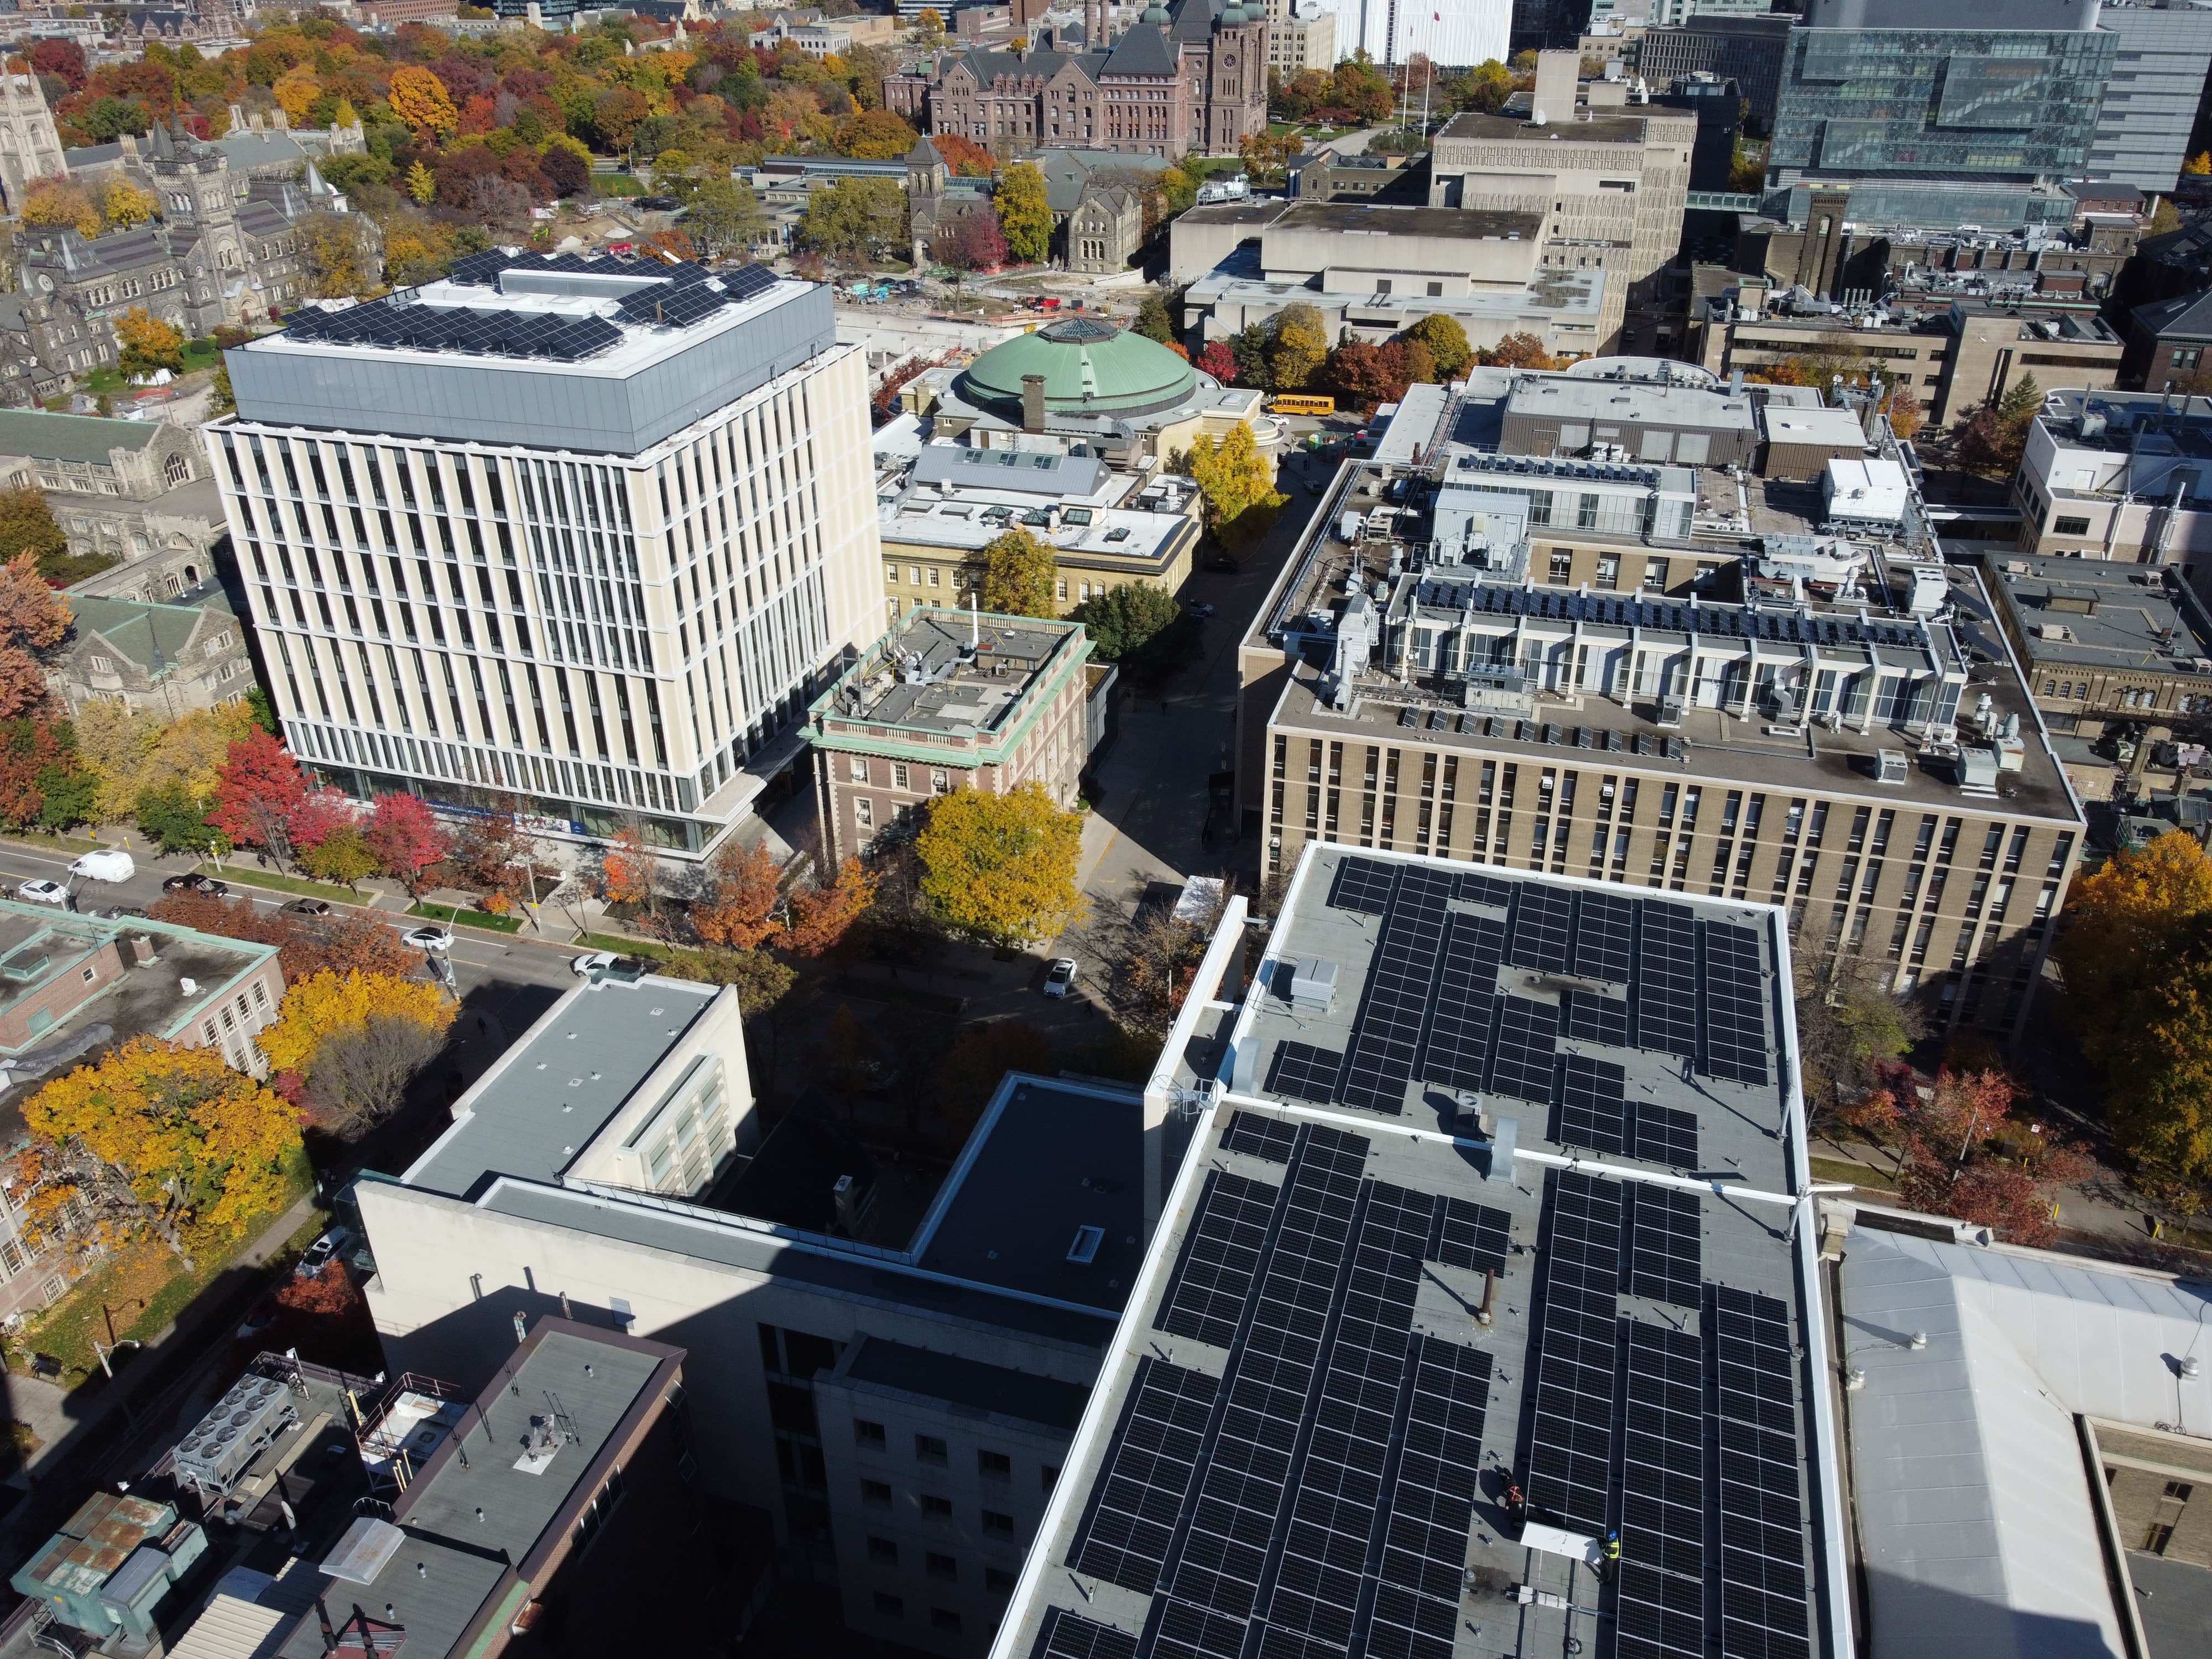 Solar panels on top of U of T campus buildings